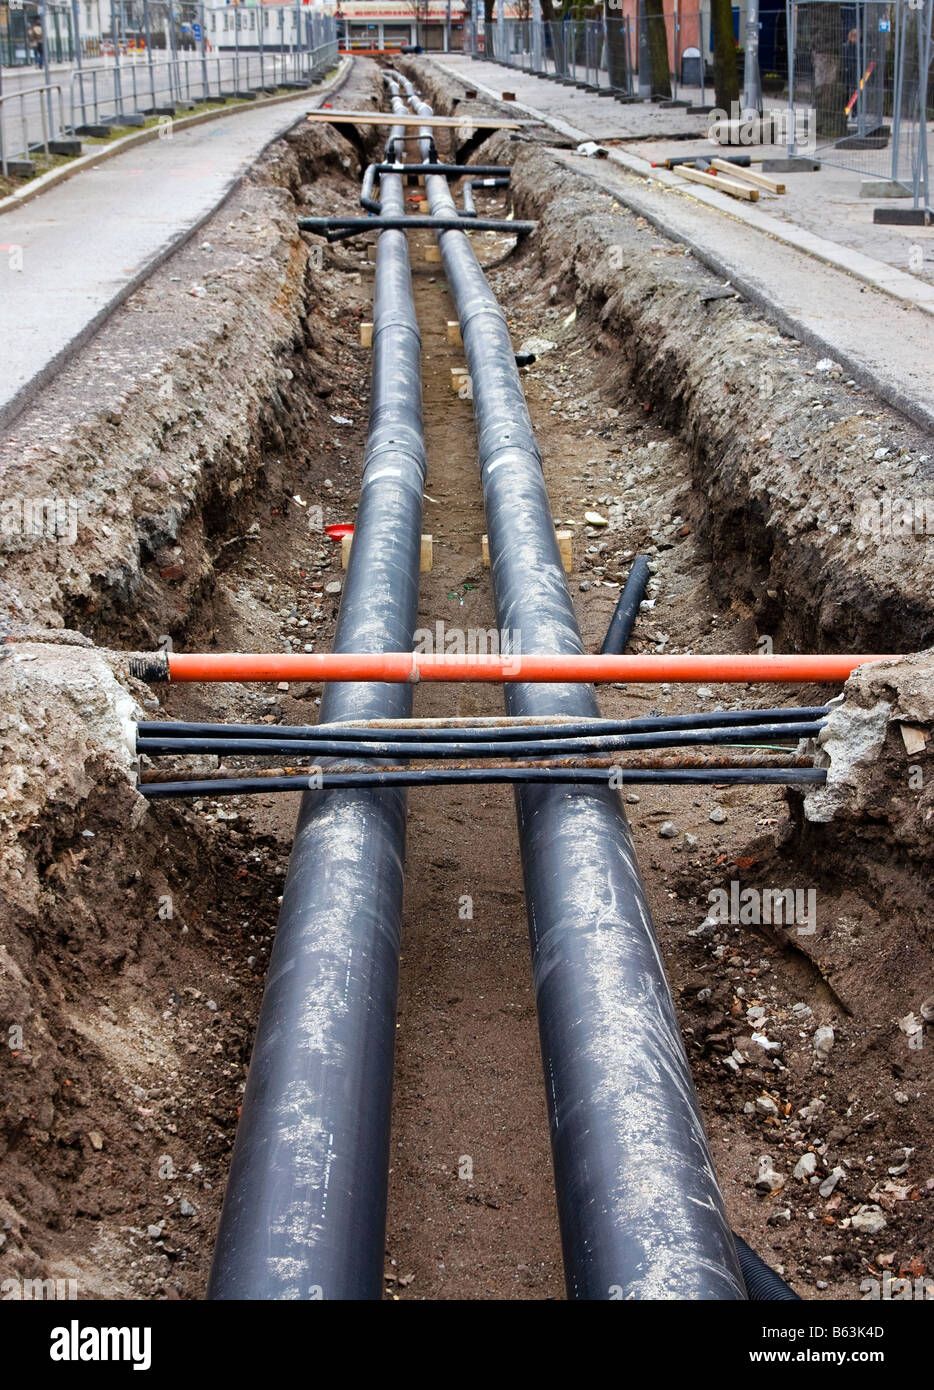 Pipes being laid in street Stock Photo